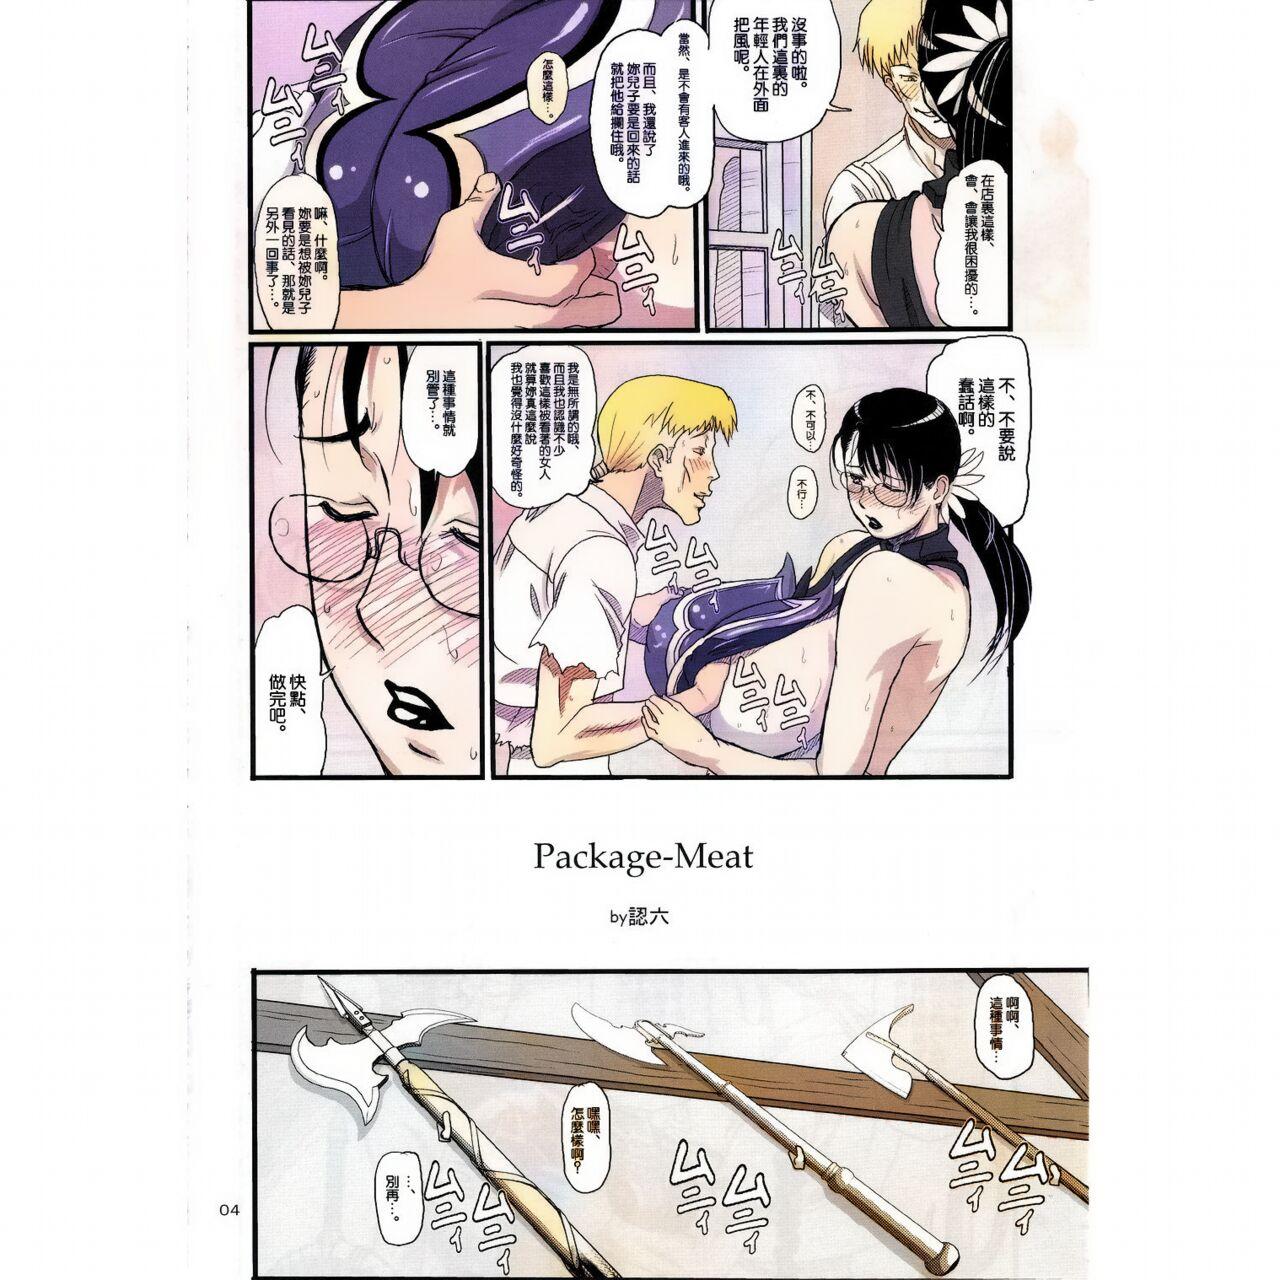 Pussysex (C72) [Shiawase Pullin Dou (Ninroku)] Package Meat (Queen's Blade) [Chinese] amateur coloring version - Queens blade Tats - Page 4